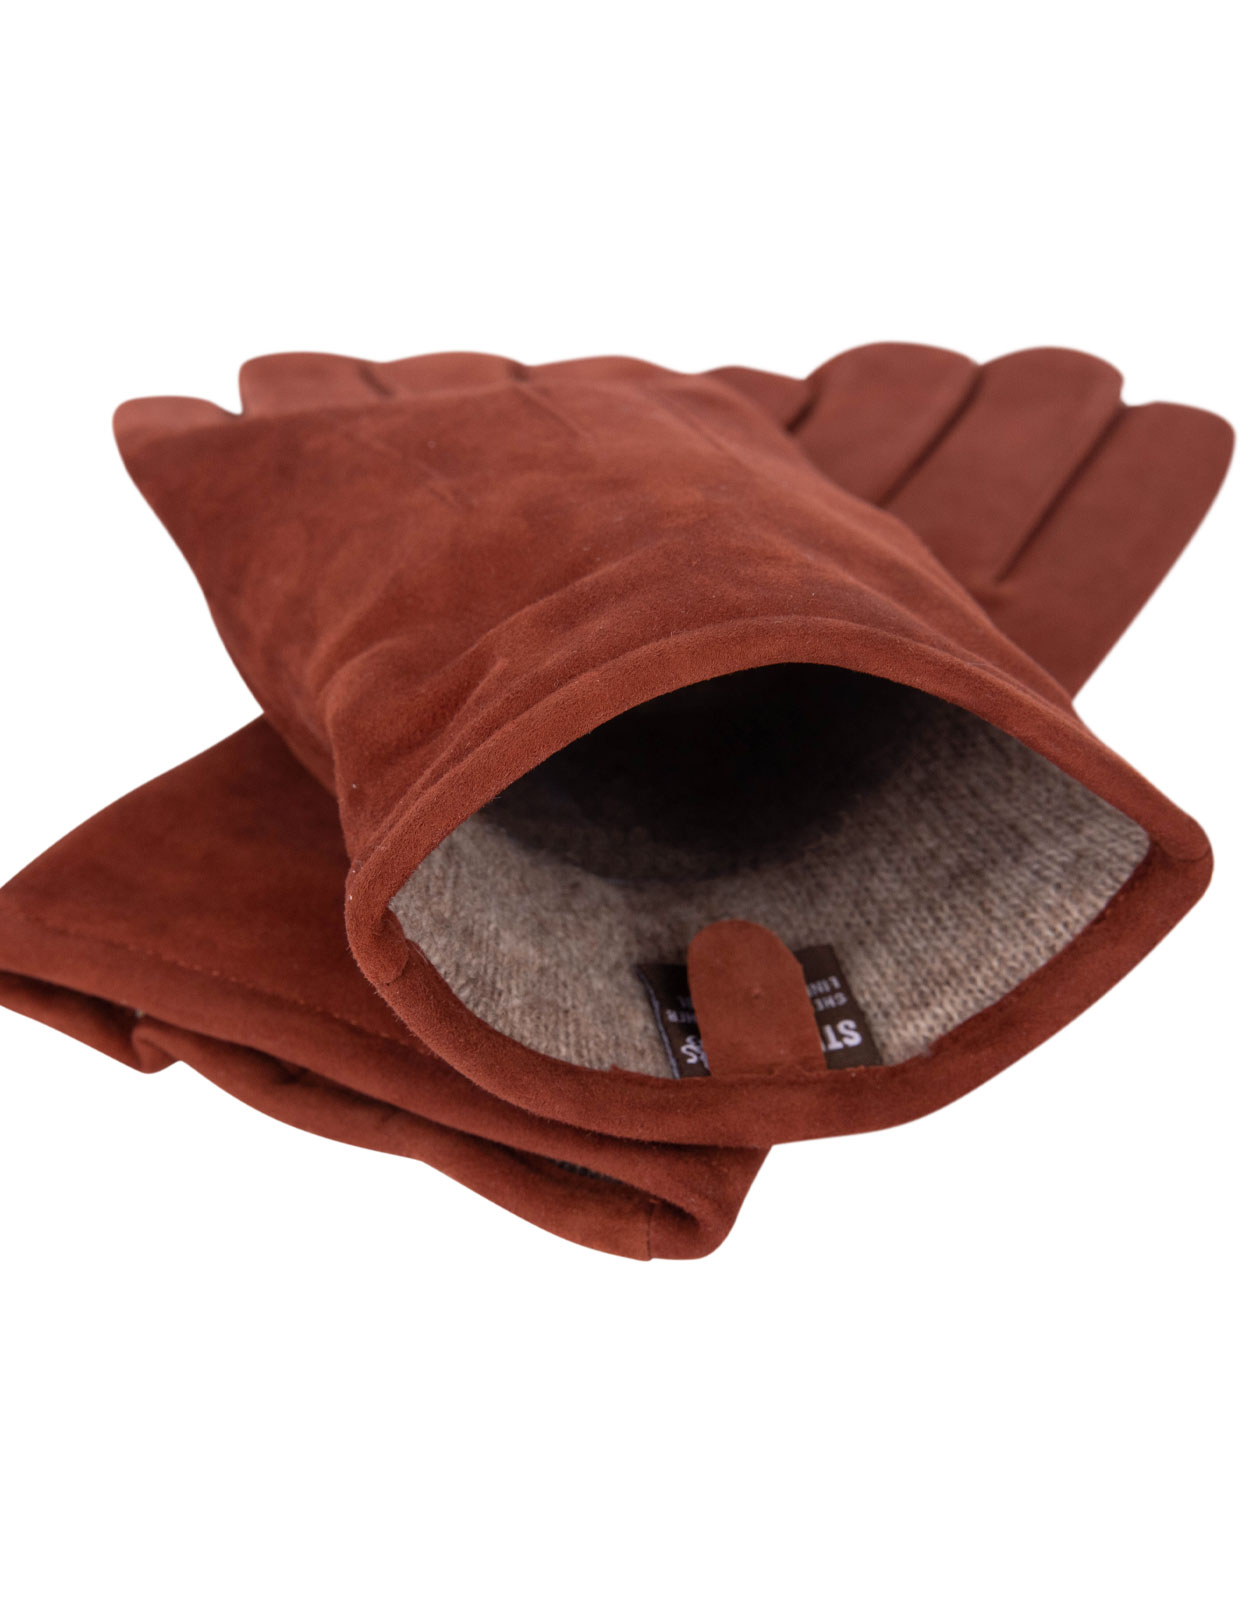 Classic Suede Gloves Red/Brown Stl 7.5